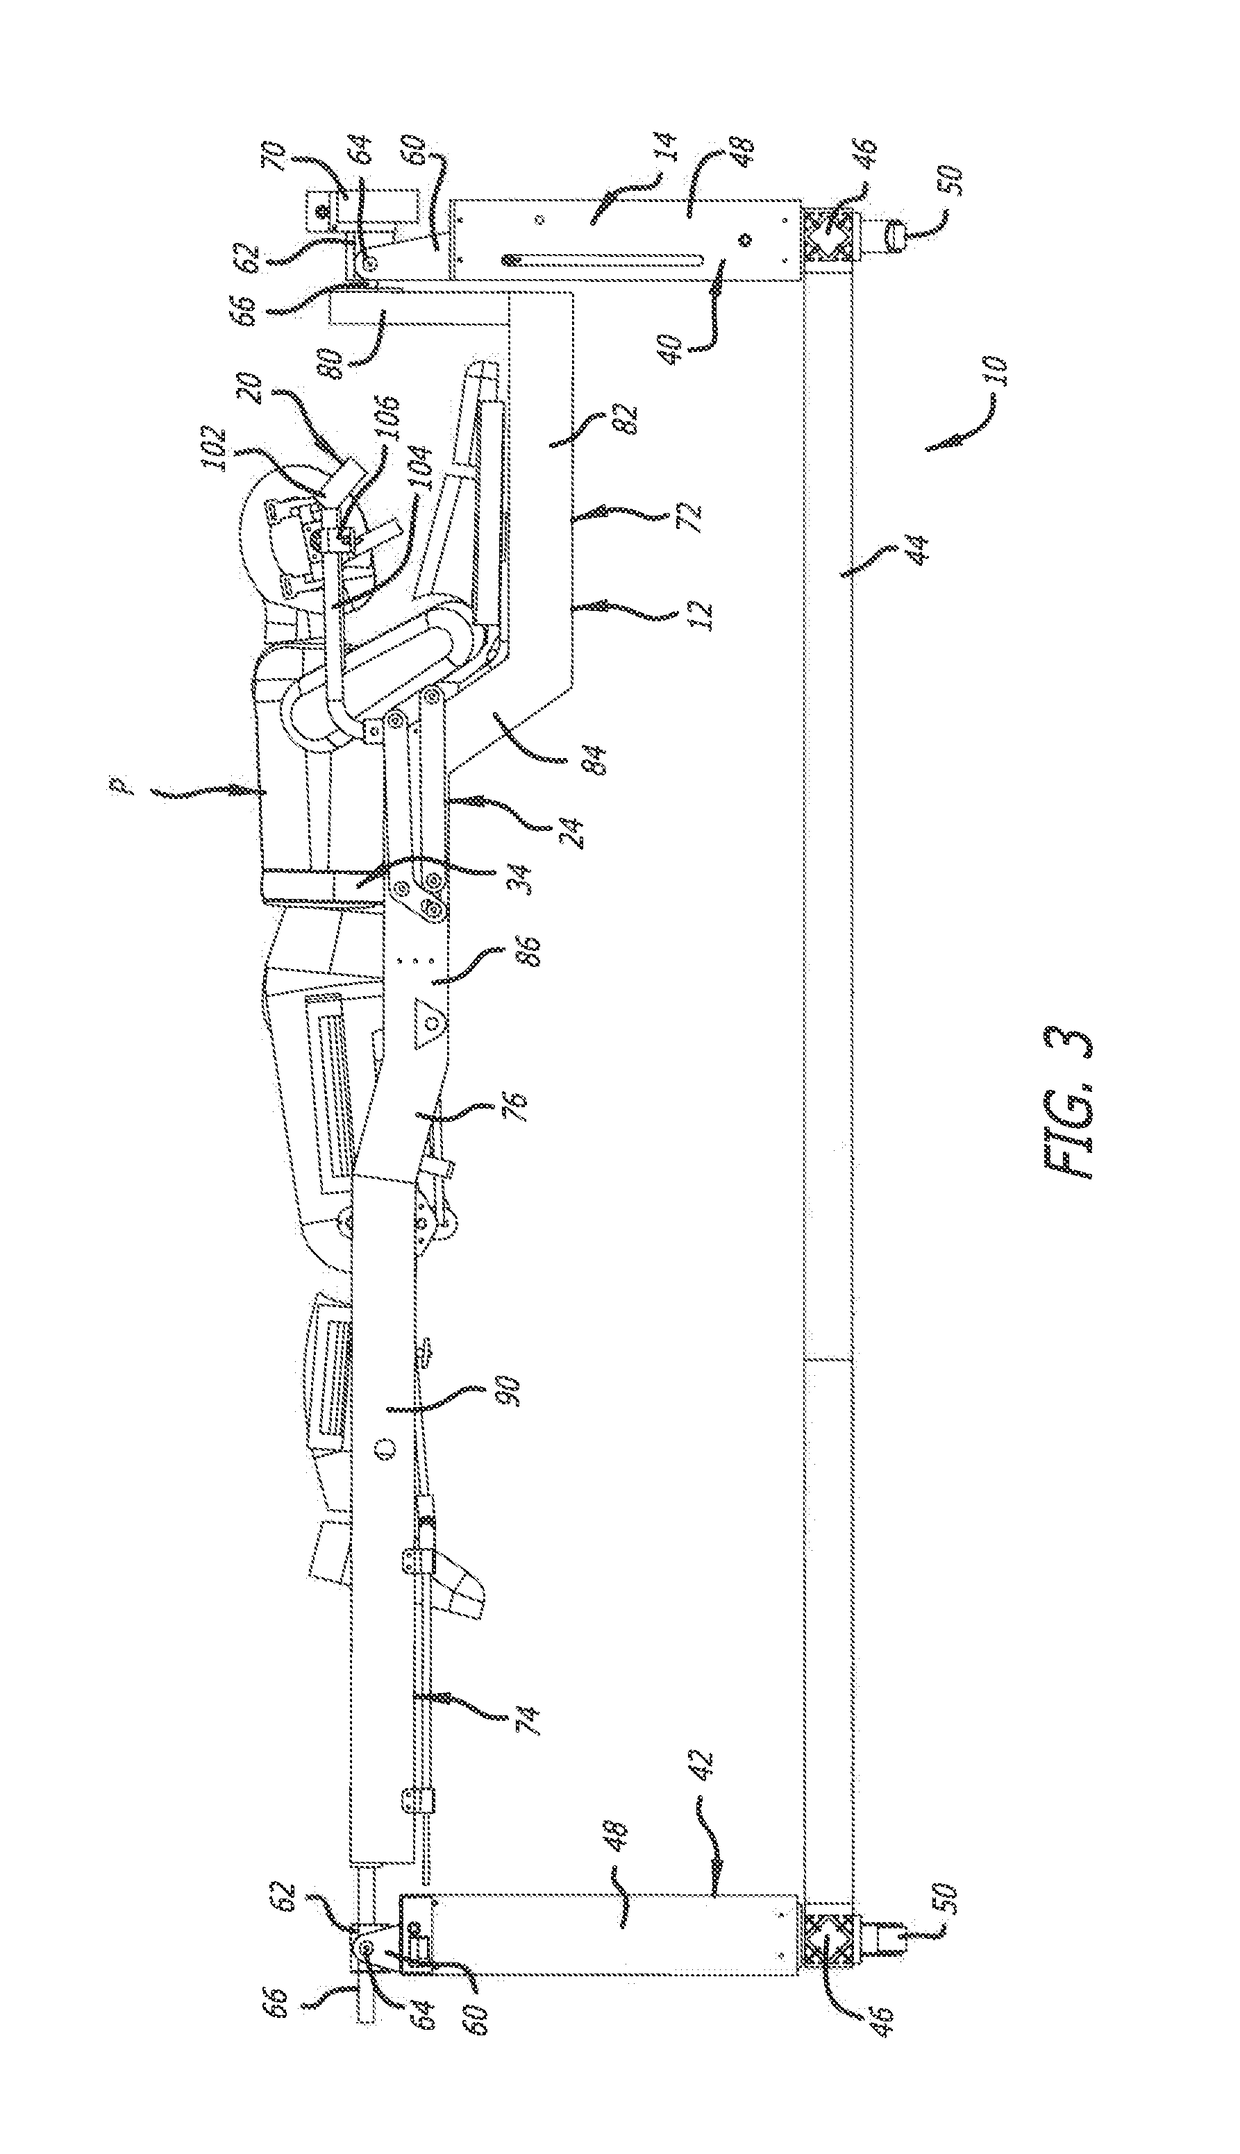 Surgical frame and method for use thereof facilitating patient transfer